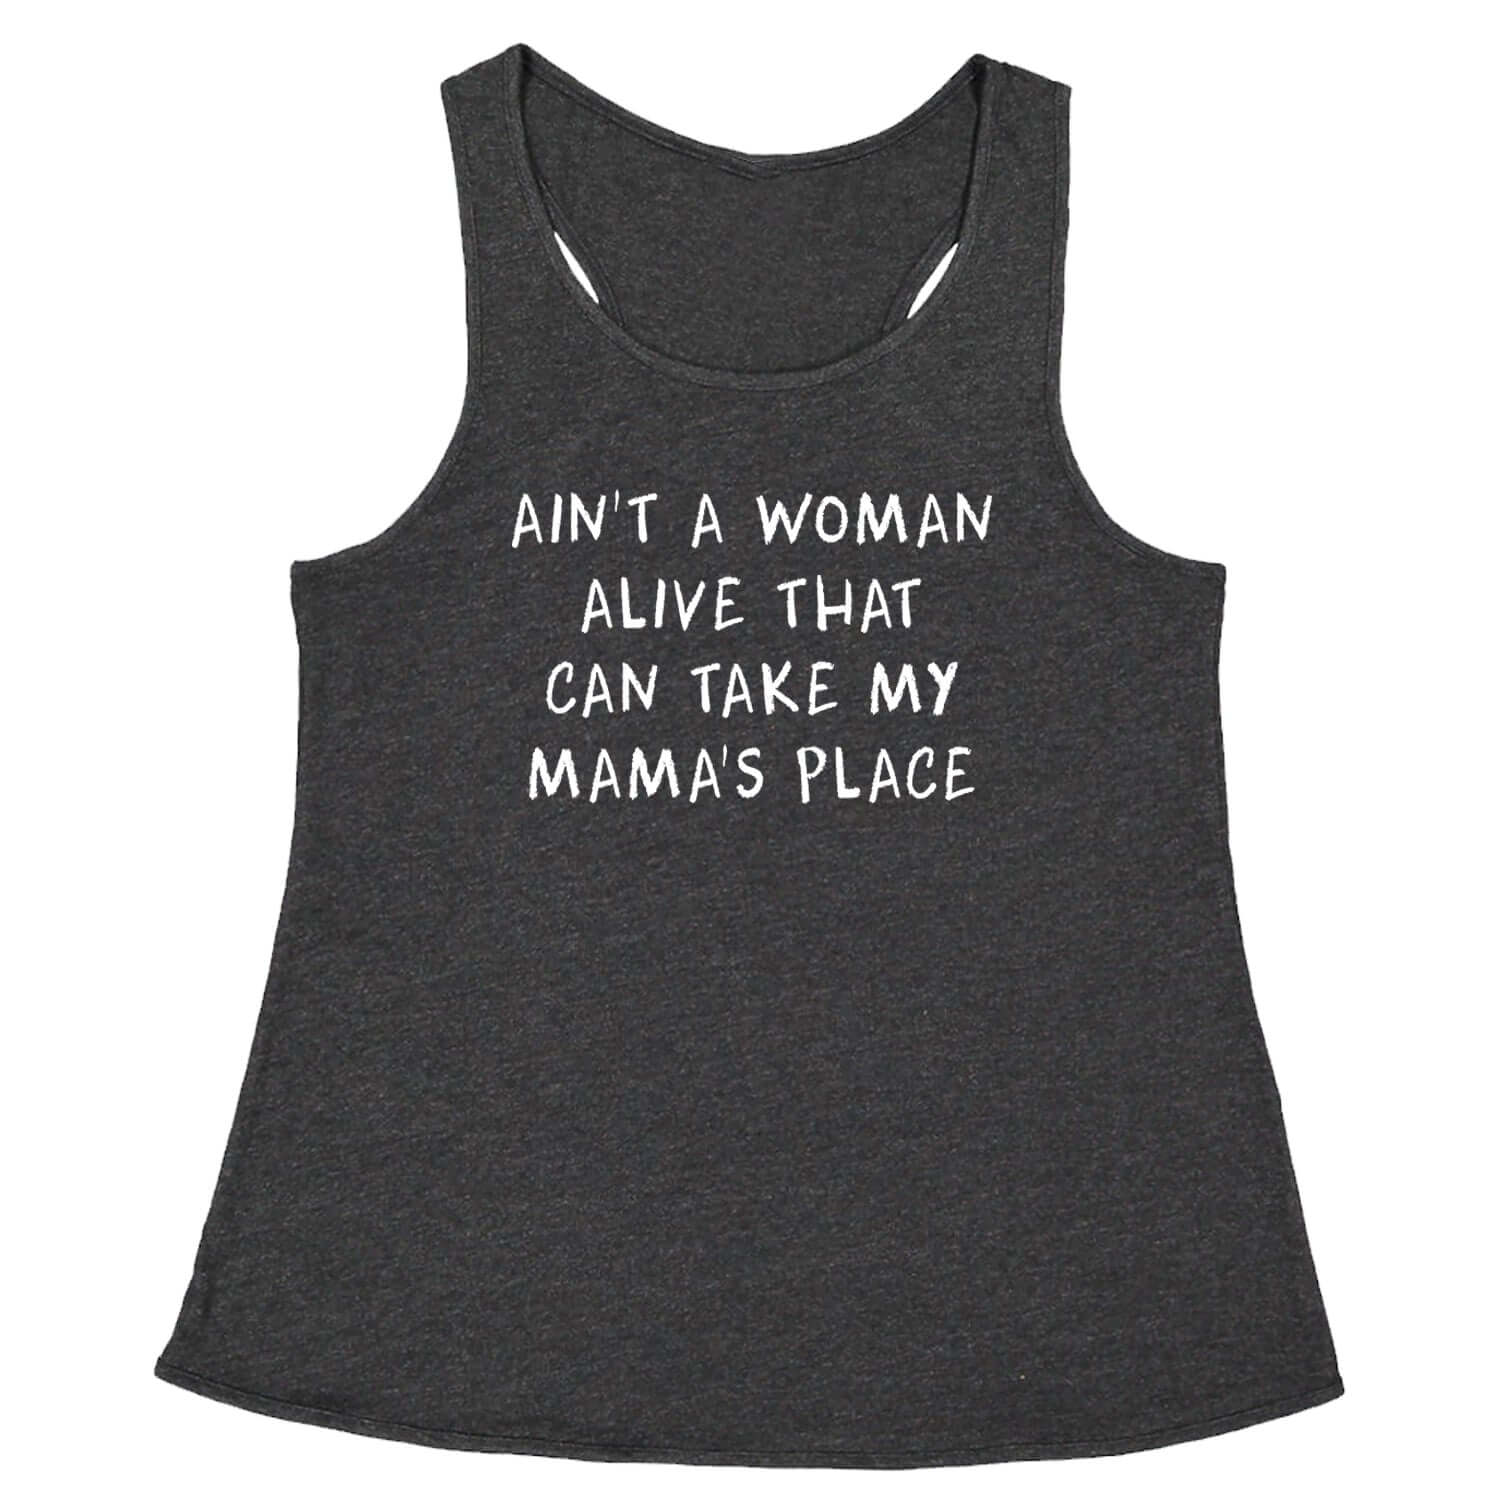 Ain't A Woman Alive That Can Take My Mama's Place Racerback Tank Top for Women 2pac, bear, day, mama, mom, mothers, shakur, tupac by Expression Tees